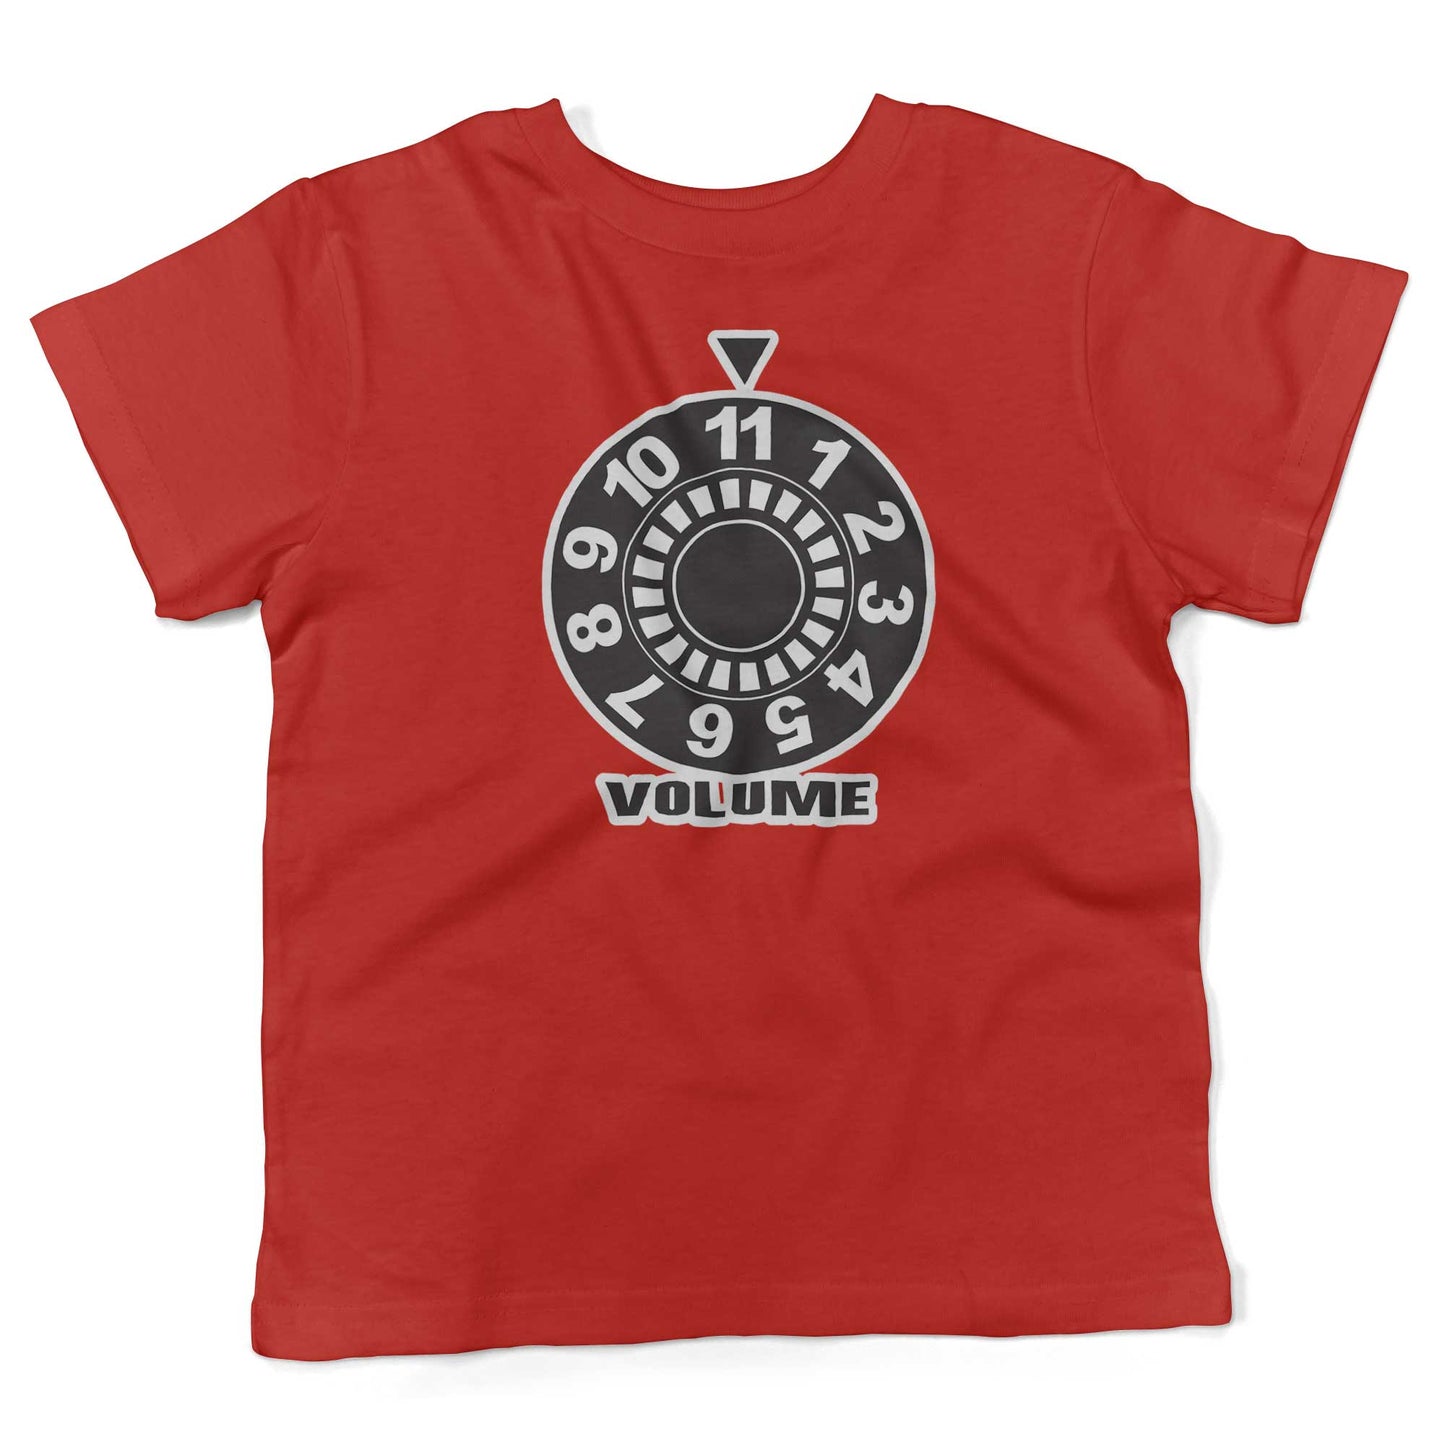 Turn It Up To 11 Toddler Shirt-Red-2T